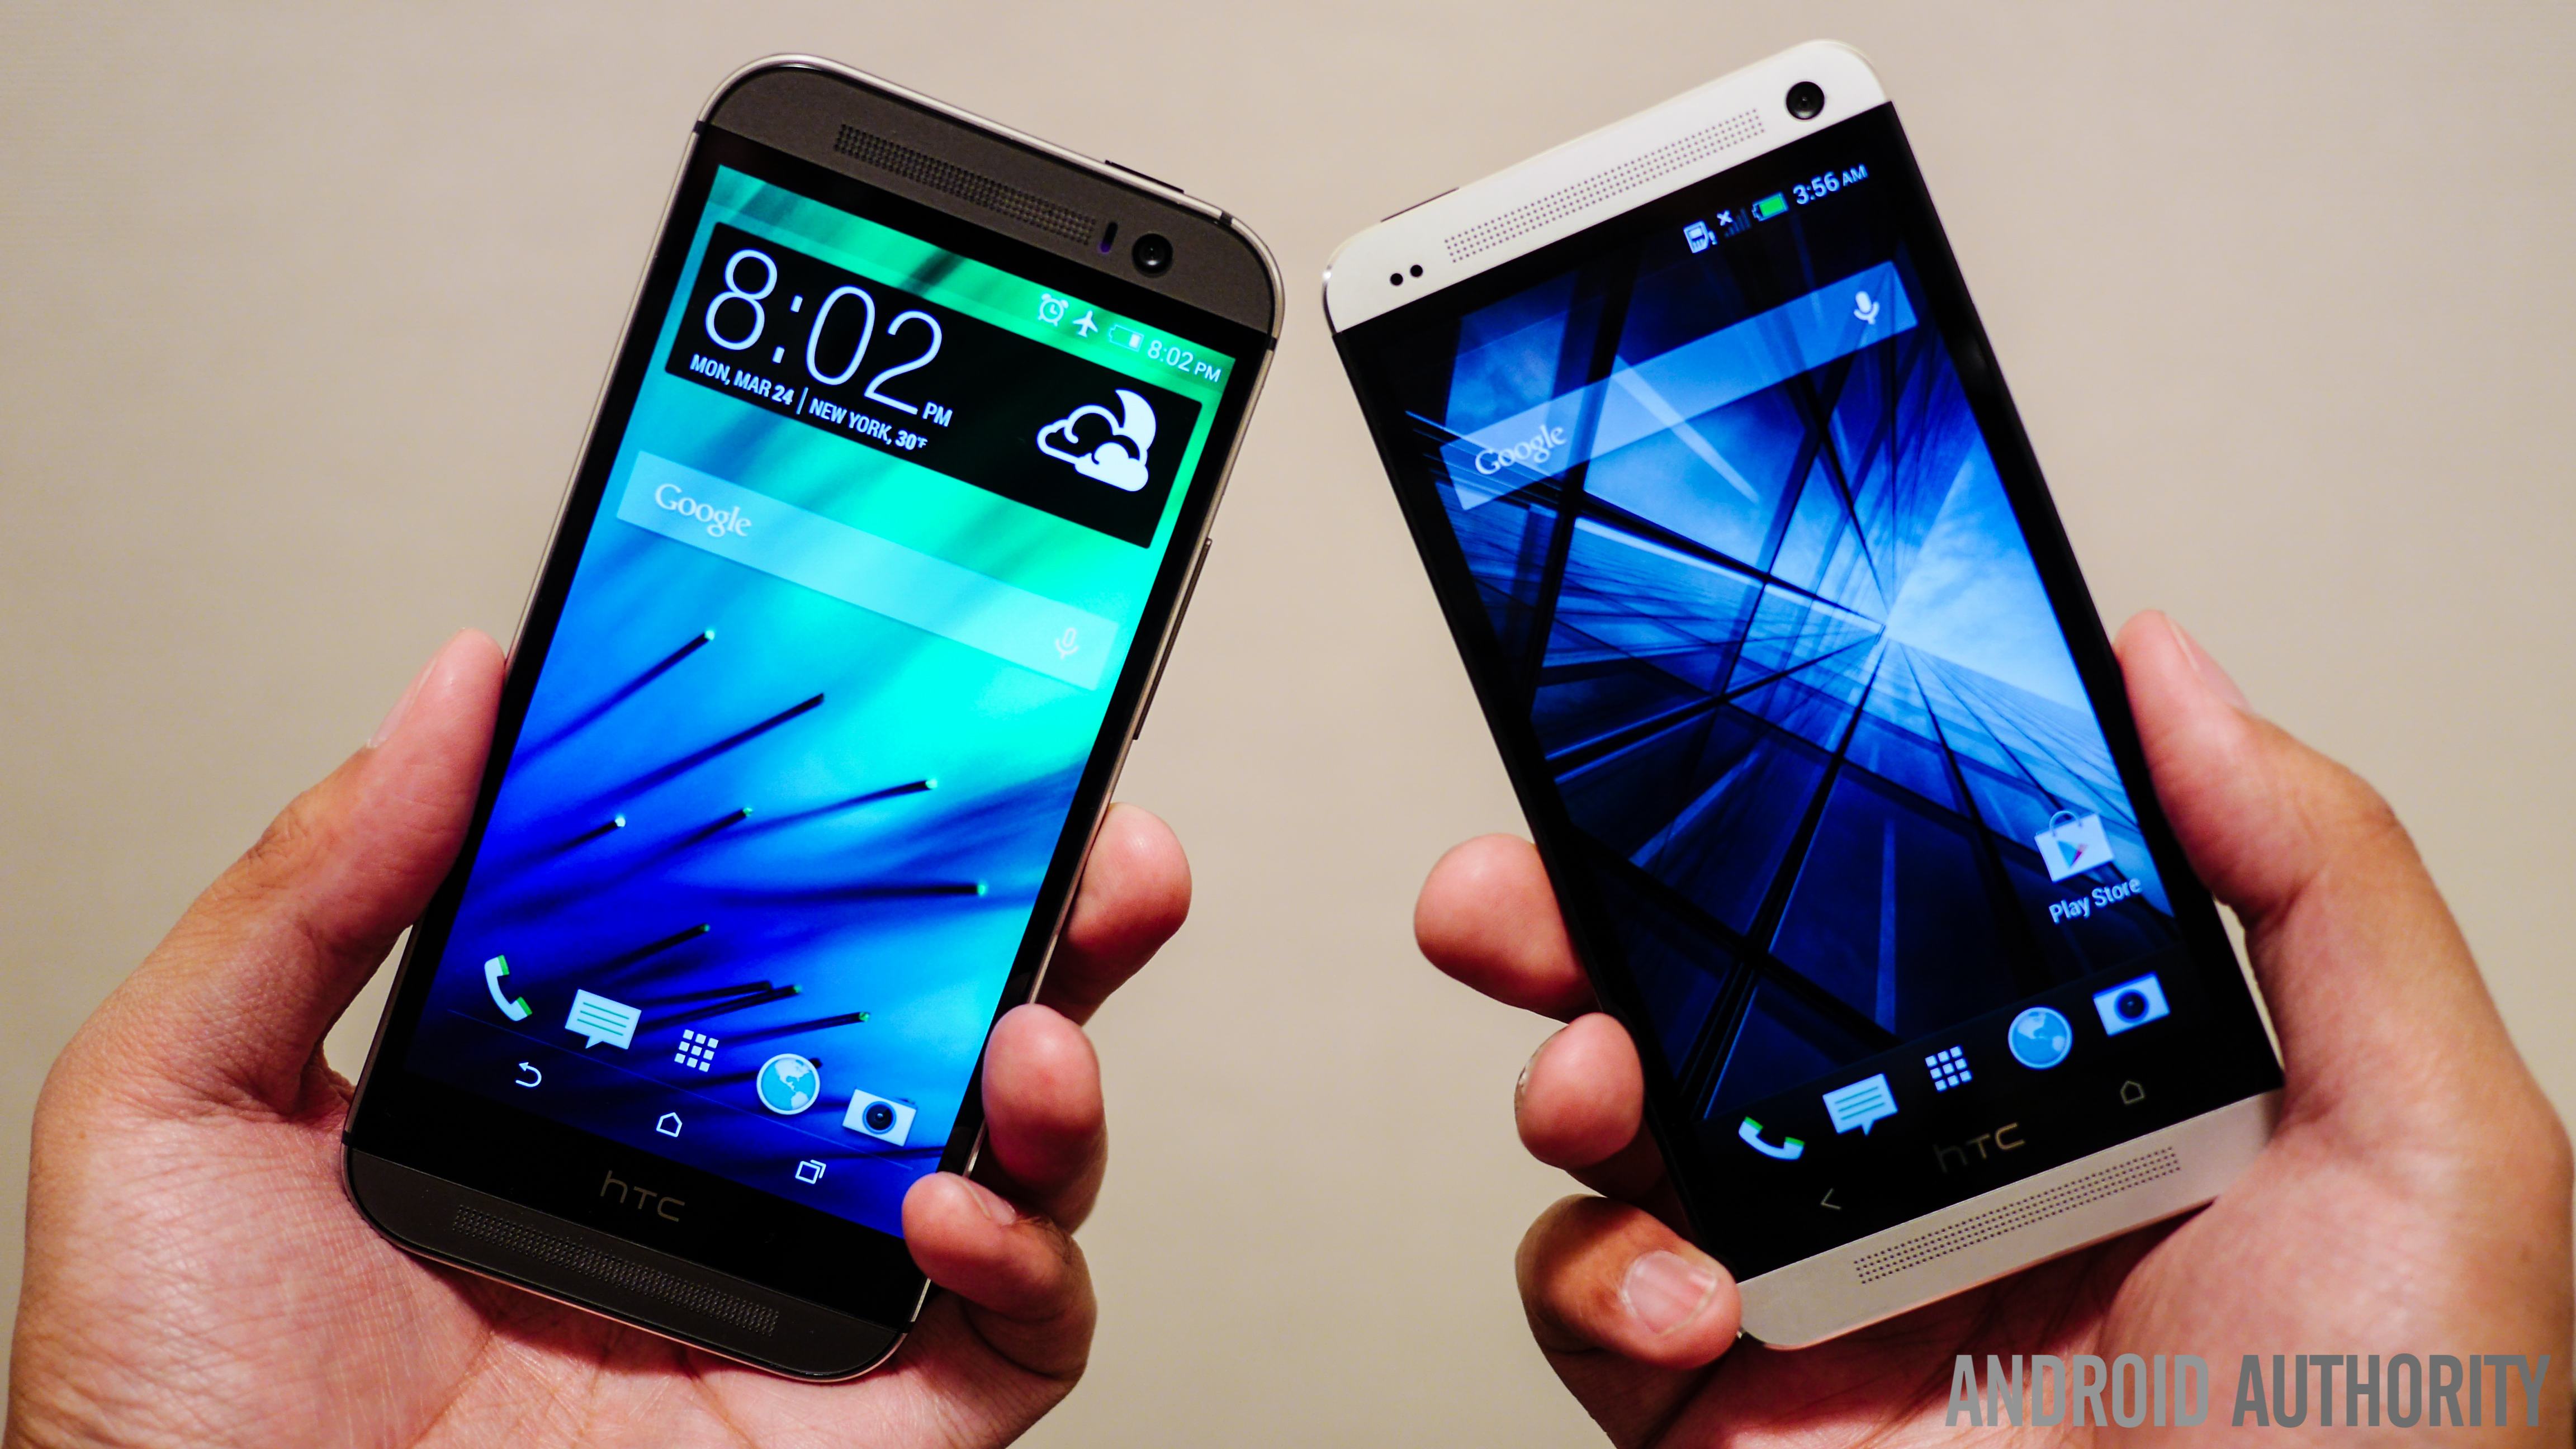 htc one m8 vs htc one m7 quick look aa handheld (2 of 6)